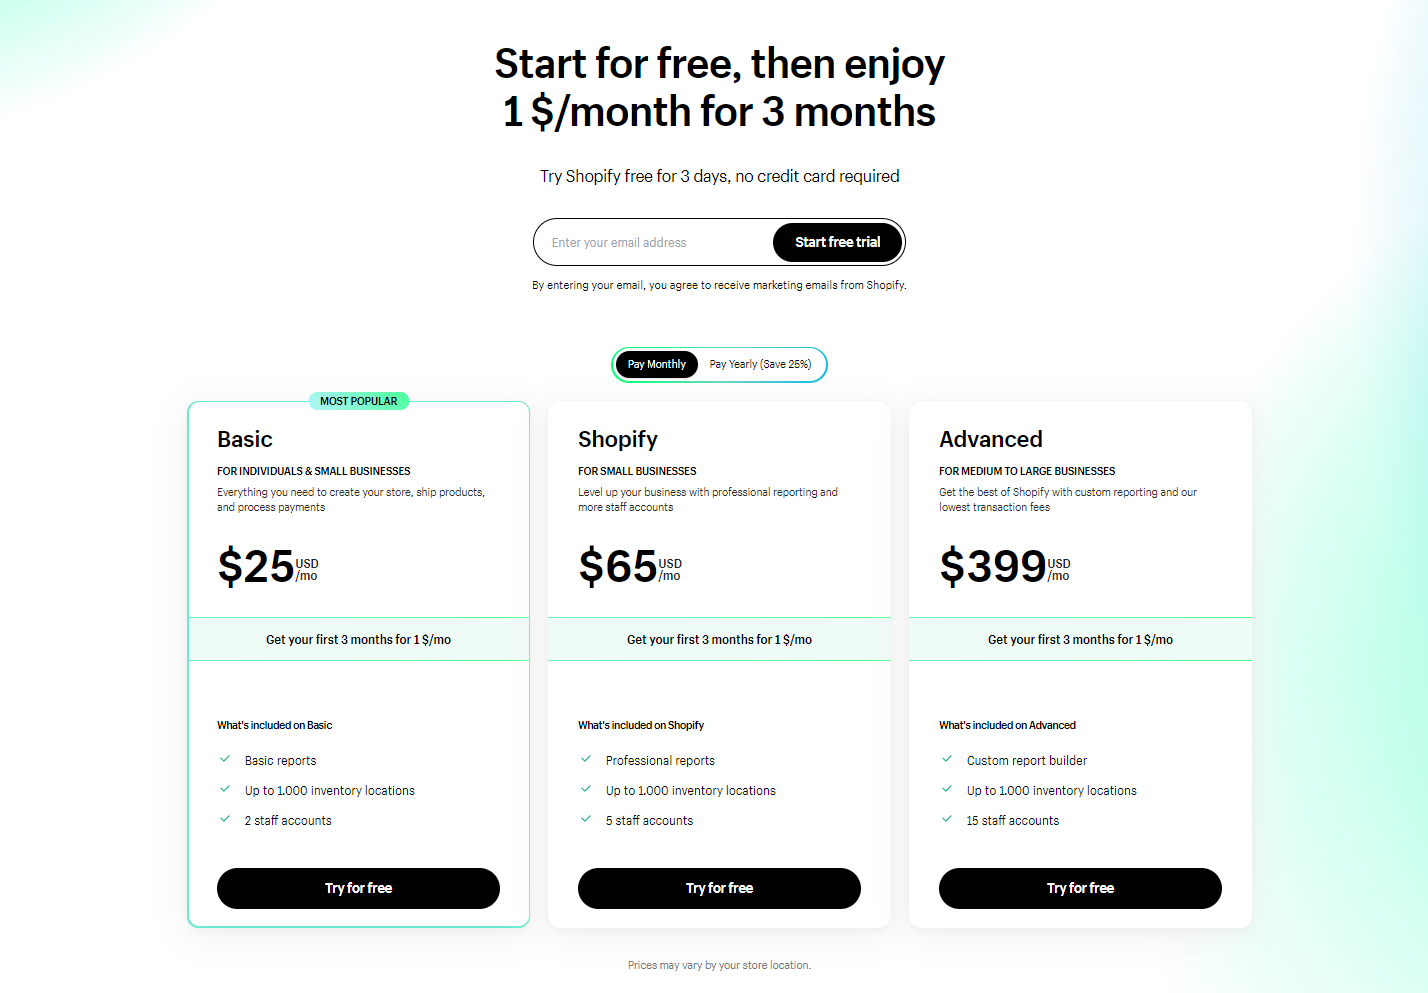 Shopify pricing plans